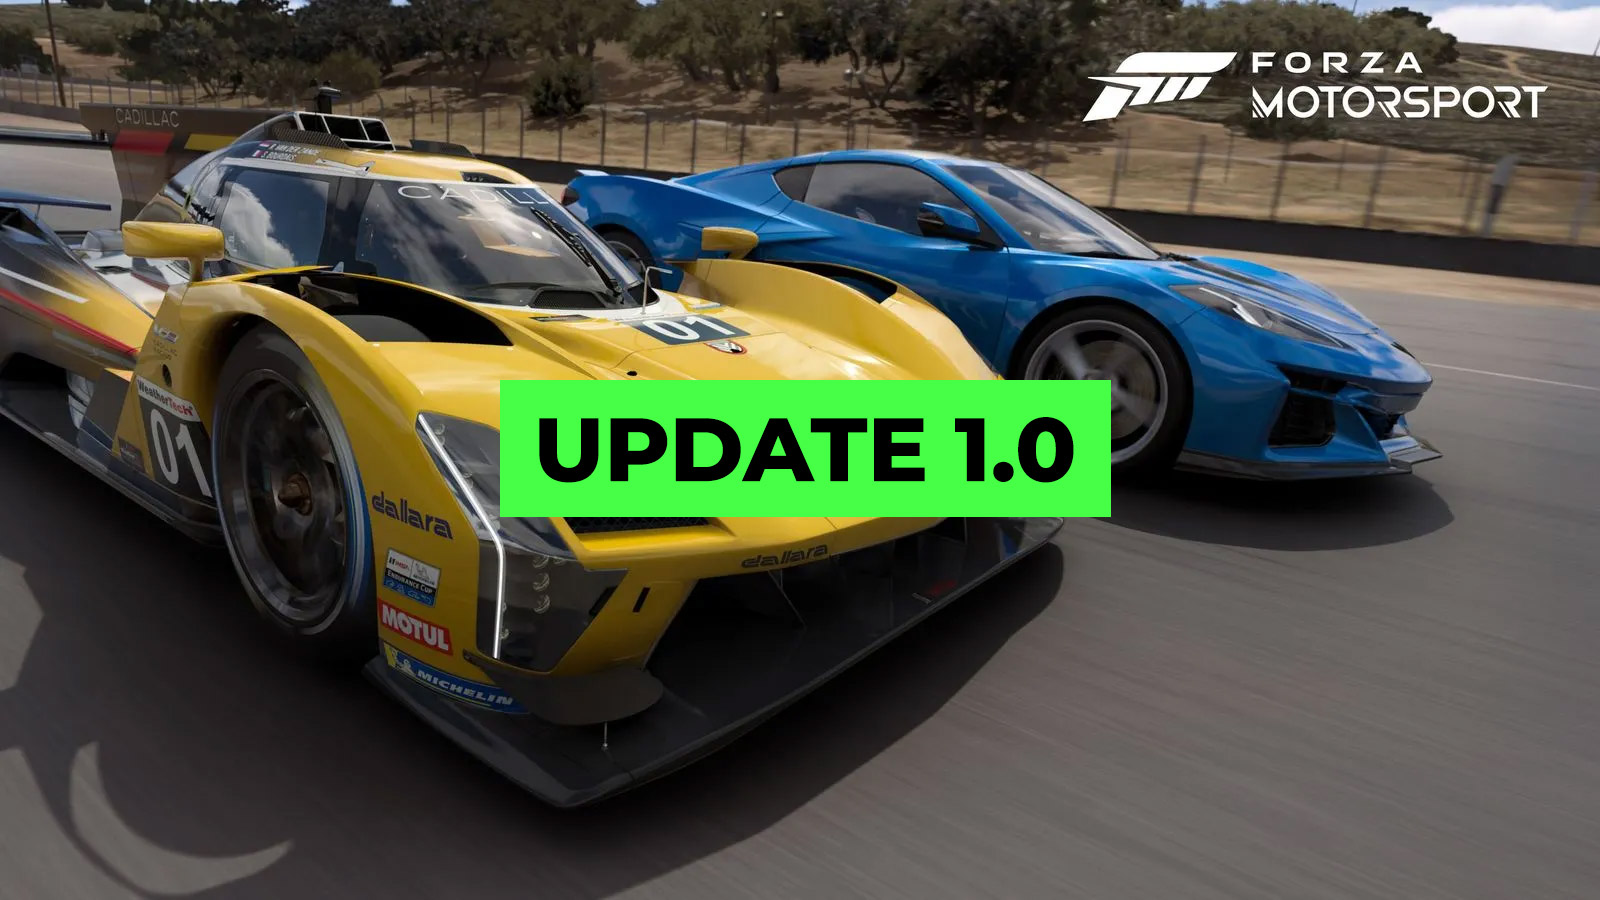 Forza Motorsport: Update 1.0 and patch notes in French, the game is more beautiful!  |  Xbox One